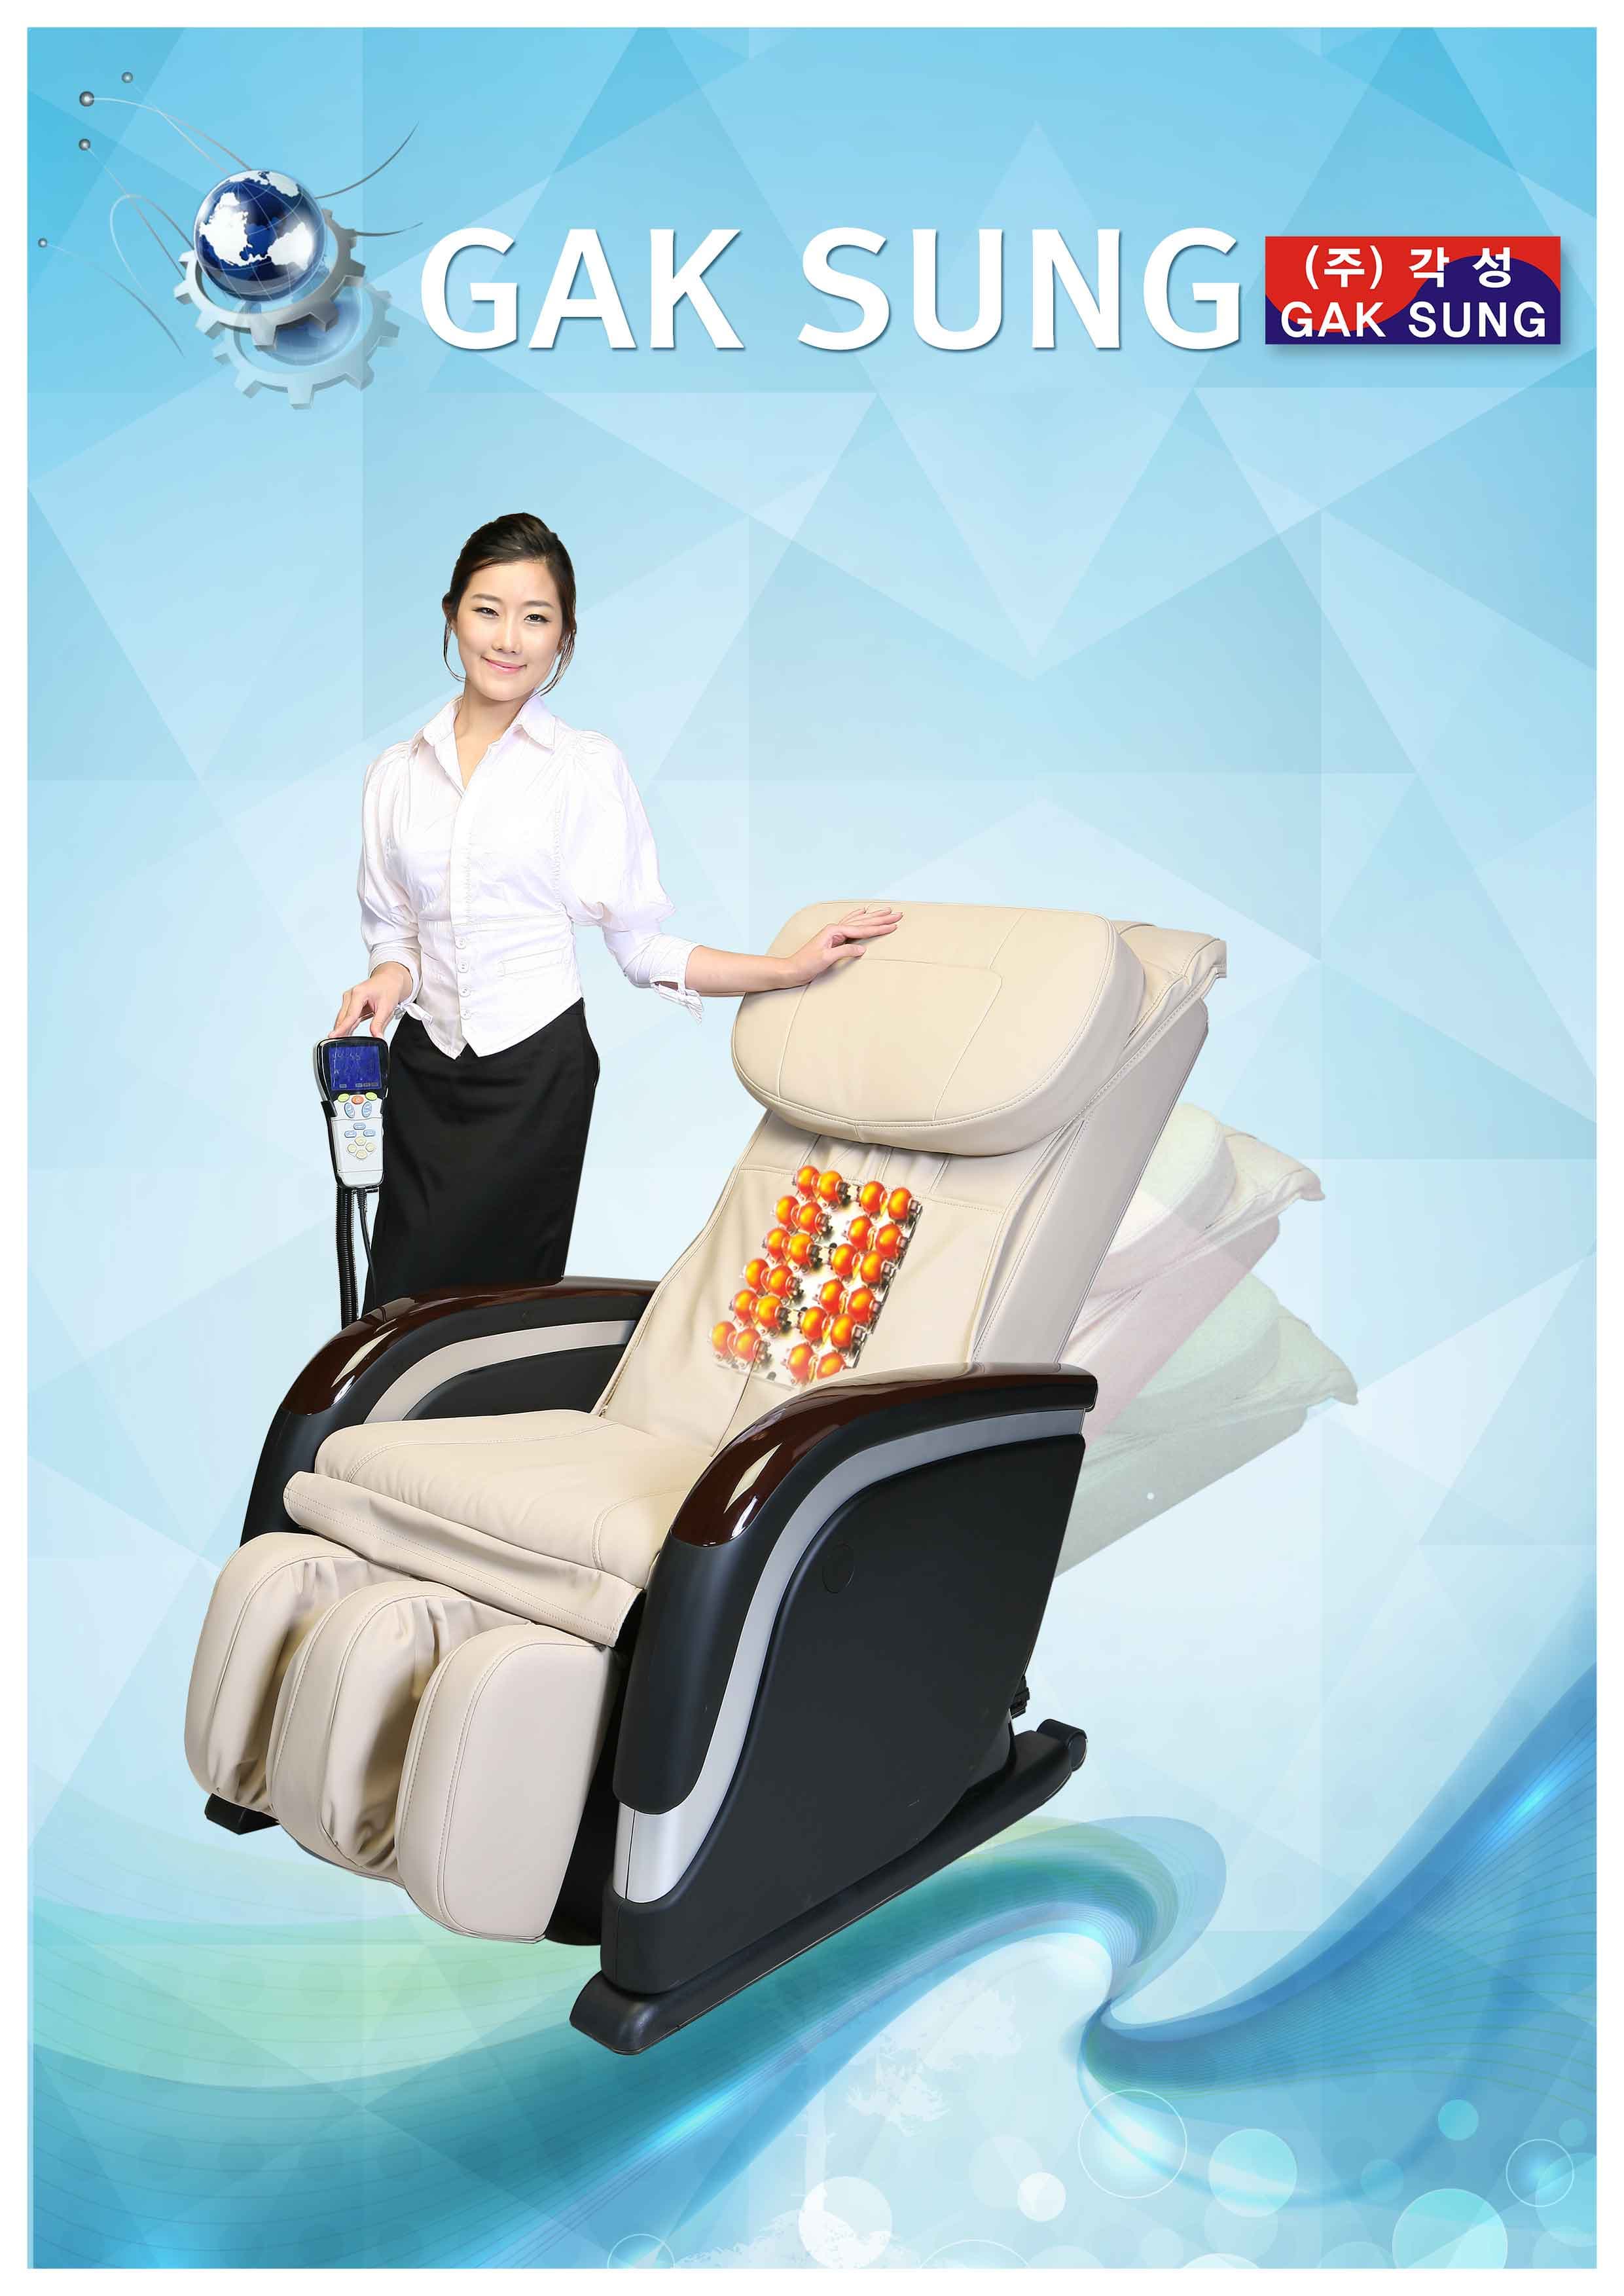 Automatic Thermal Massage Chair by Ceramic heating roller _Model _ Champ of Champ_